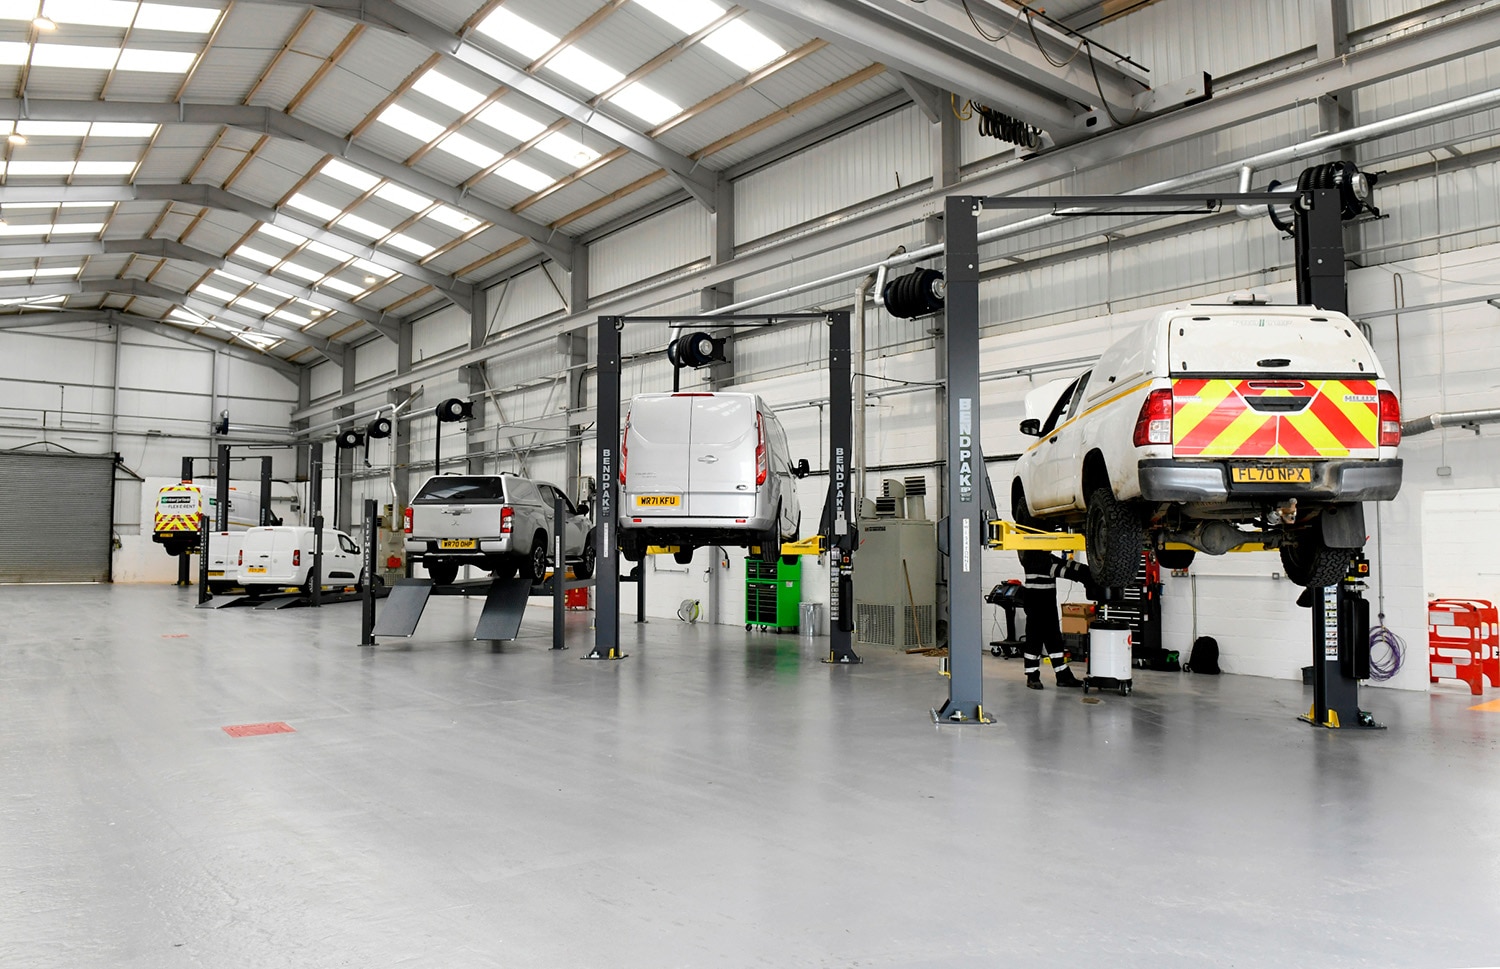 Enterprise Flex-E-Rent Invests £1m to Reduce Vehicle Downtime